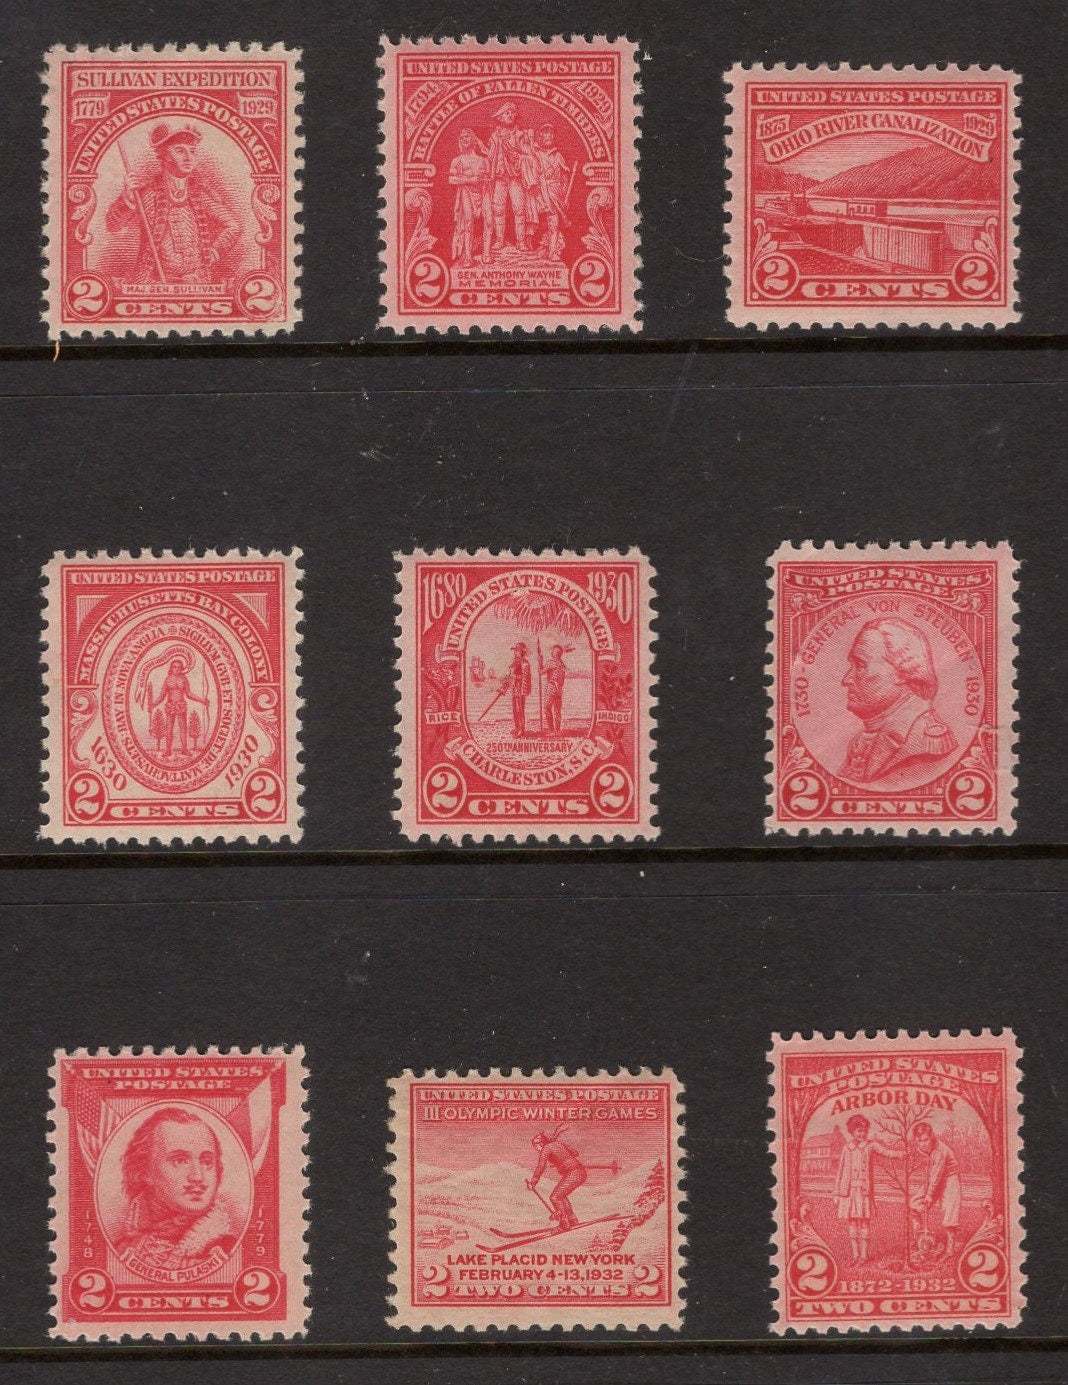 9 2c RED STAMPS VINTAGE Issued in between Years 1929 to 1932 (sbetween 657 // 717) Fresh Bright Classic Postage Stamps -